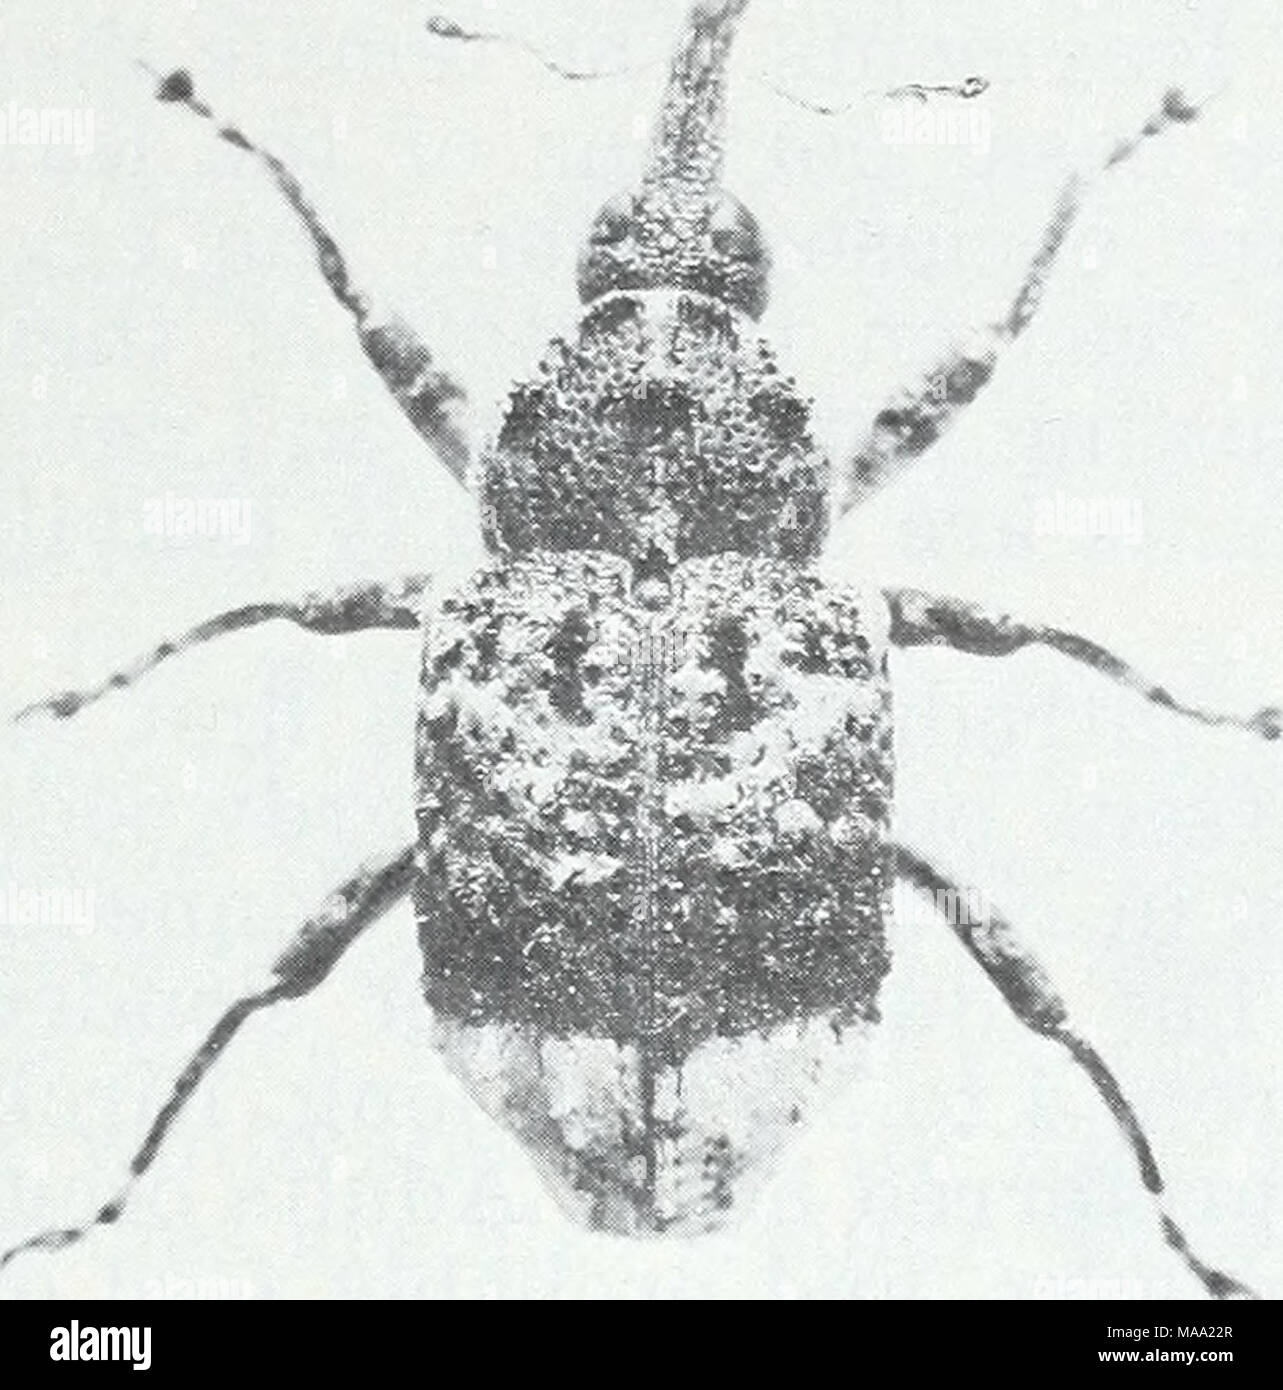 . Eastern forest insects . I Sr F-519950 F-501808 Figure 80.—Adult of the poplar- Figure 81.—Galls in pine produced and-willow borer, Cryptorhyn- by the pine gall weevil, Podapion chus lapathi. gallicola. now known to occur also in Massachusetts, Maine, Connecticut, Vermont, New York, and Pennsylvania. It feeds on a wide variety of species in the genera Thuja, Chamaecyparts, and Juniperus. Certain varieties of T. occidejitalis and C. obtusa appear to be particularly favored. The adult is light brown with grayish wings and is about 6 mm. long. The beak is short, not quite as long as broad, and Stock Photo